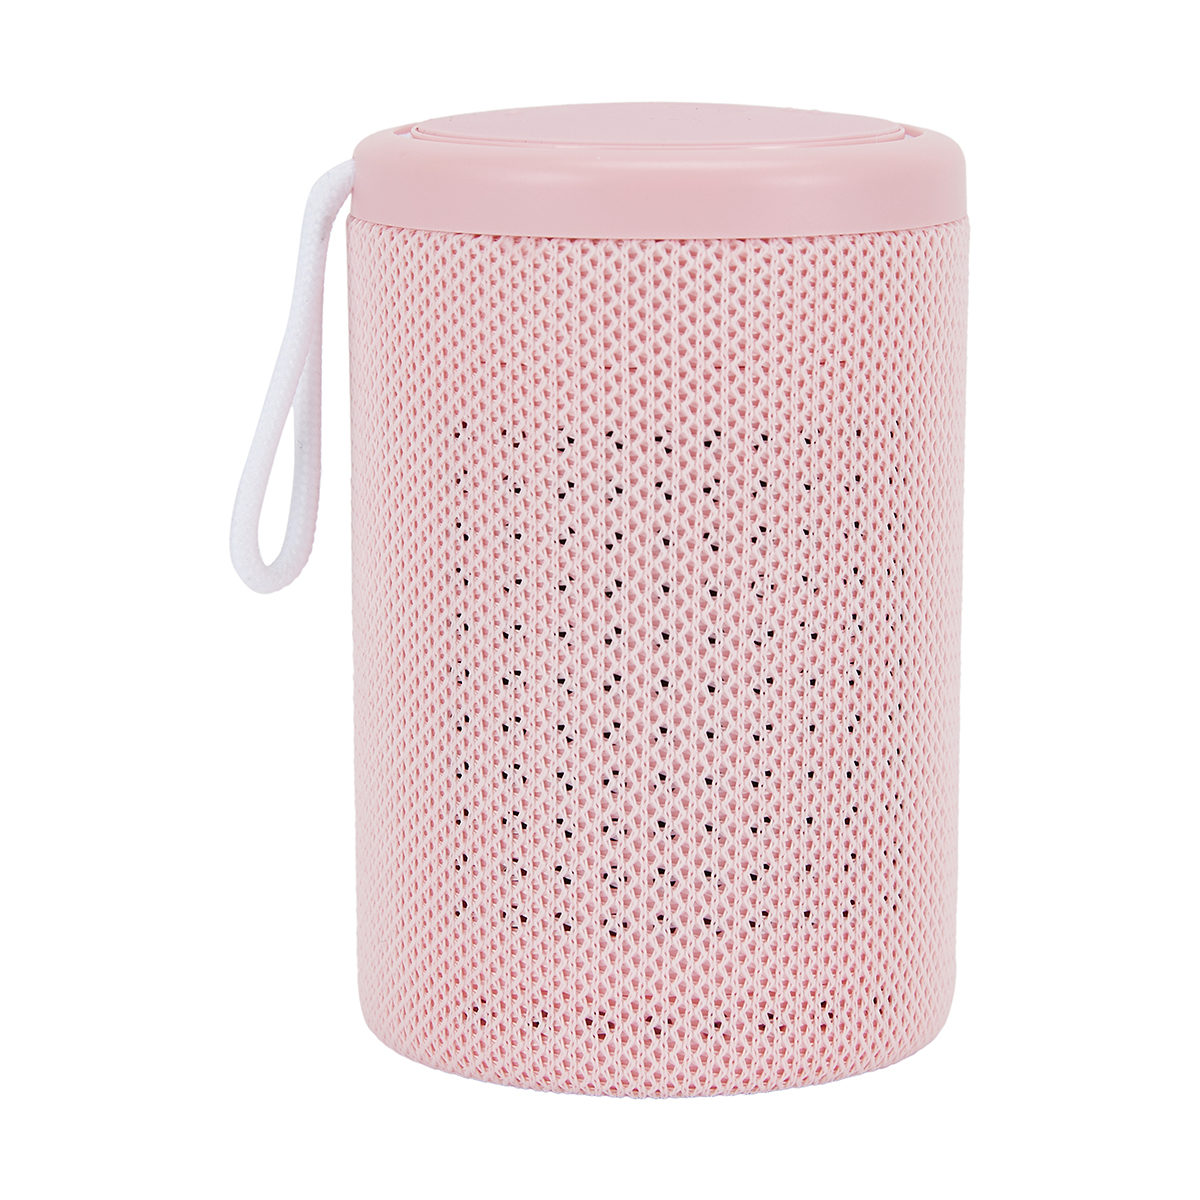 Gifts for Mother's Day | Bluetooth Speaker | Beanstalk Mums